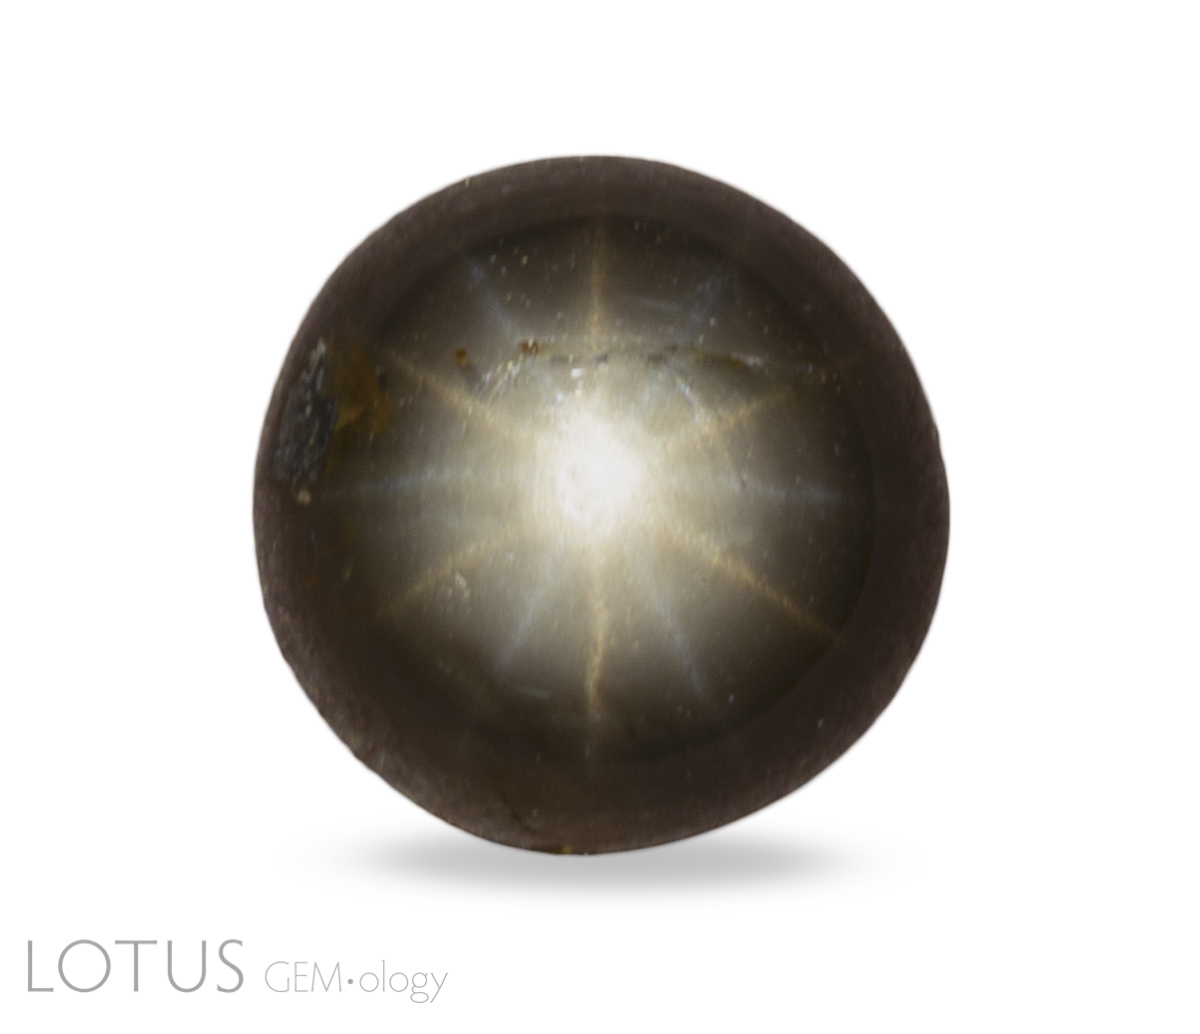 Figure 1. This 12-ray black star sapphire from Chanthaburi, Thailand contains two sets of silk offset 30° from one another. Note that one star is white while the other is slightly yellow. Photo: Chanon Yimkeativong/Lotus Gemology. Click on the photo for a larger image.